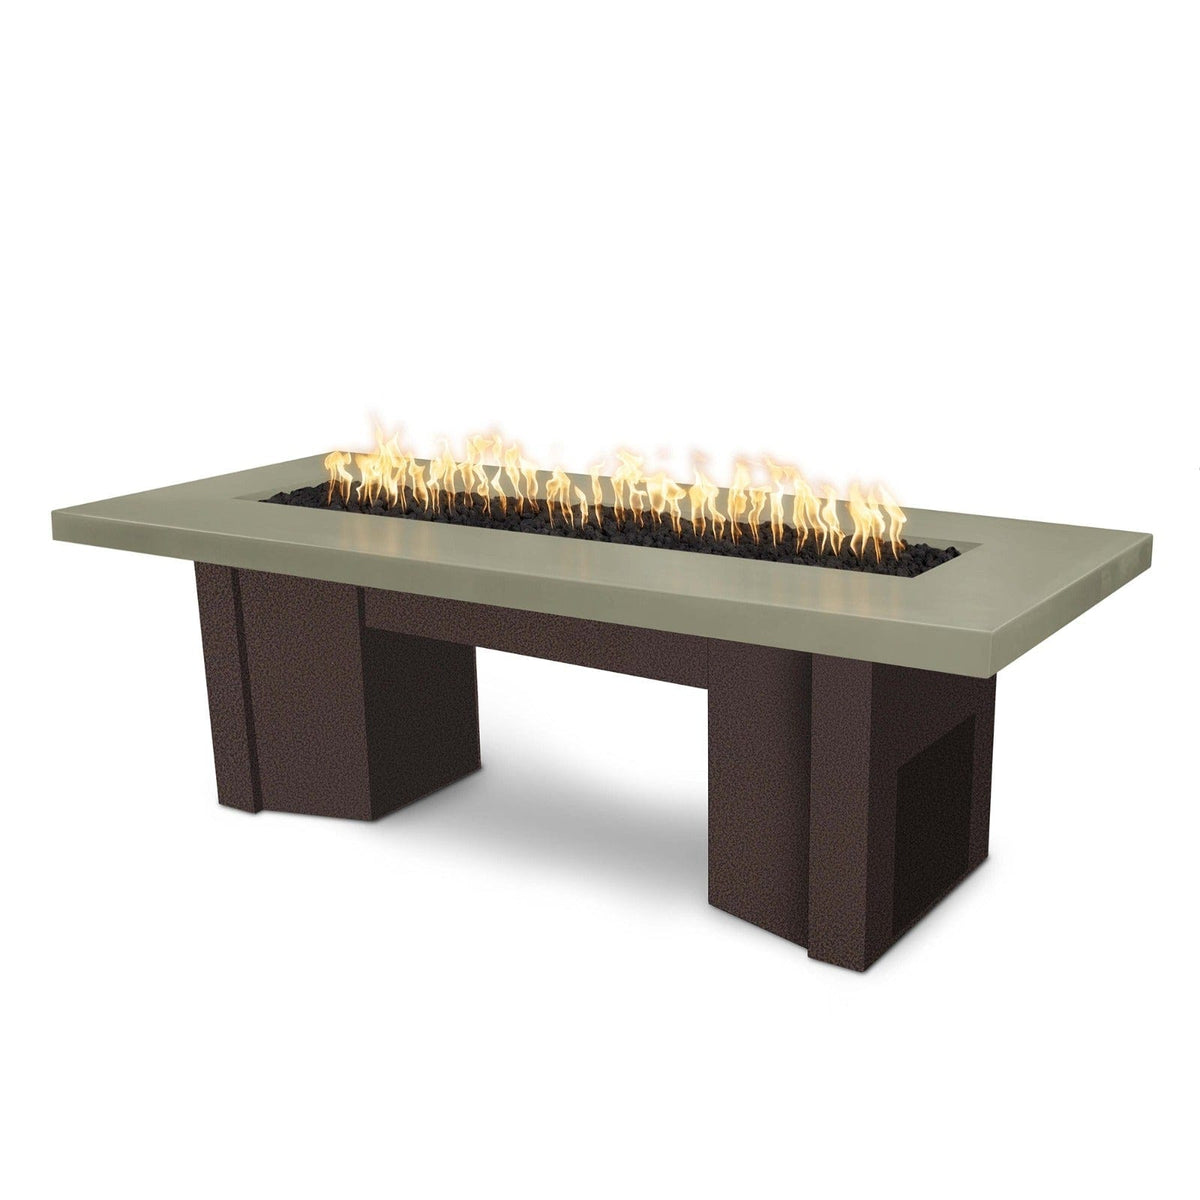 The Outdoor Plus Fire Features Ash (-ASH) / Copper Vein Powder Coated Steel (-CPV) The Outdoor Plus 60&quot; Alameda Fire Table Smooth Concrete in Natural Gas - 110V Plug &amp; Play Electronic Ignition / OPT-ALMGFRC60EKIT-NG